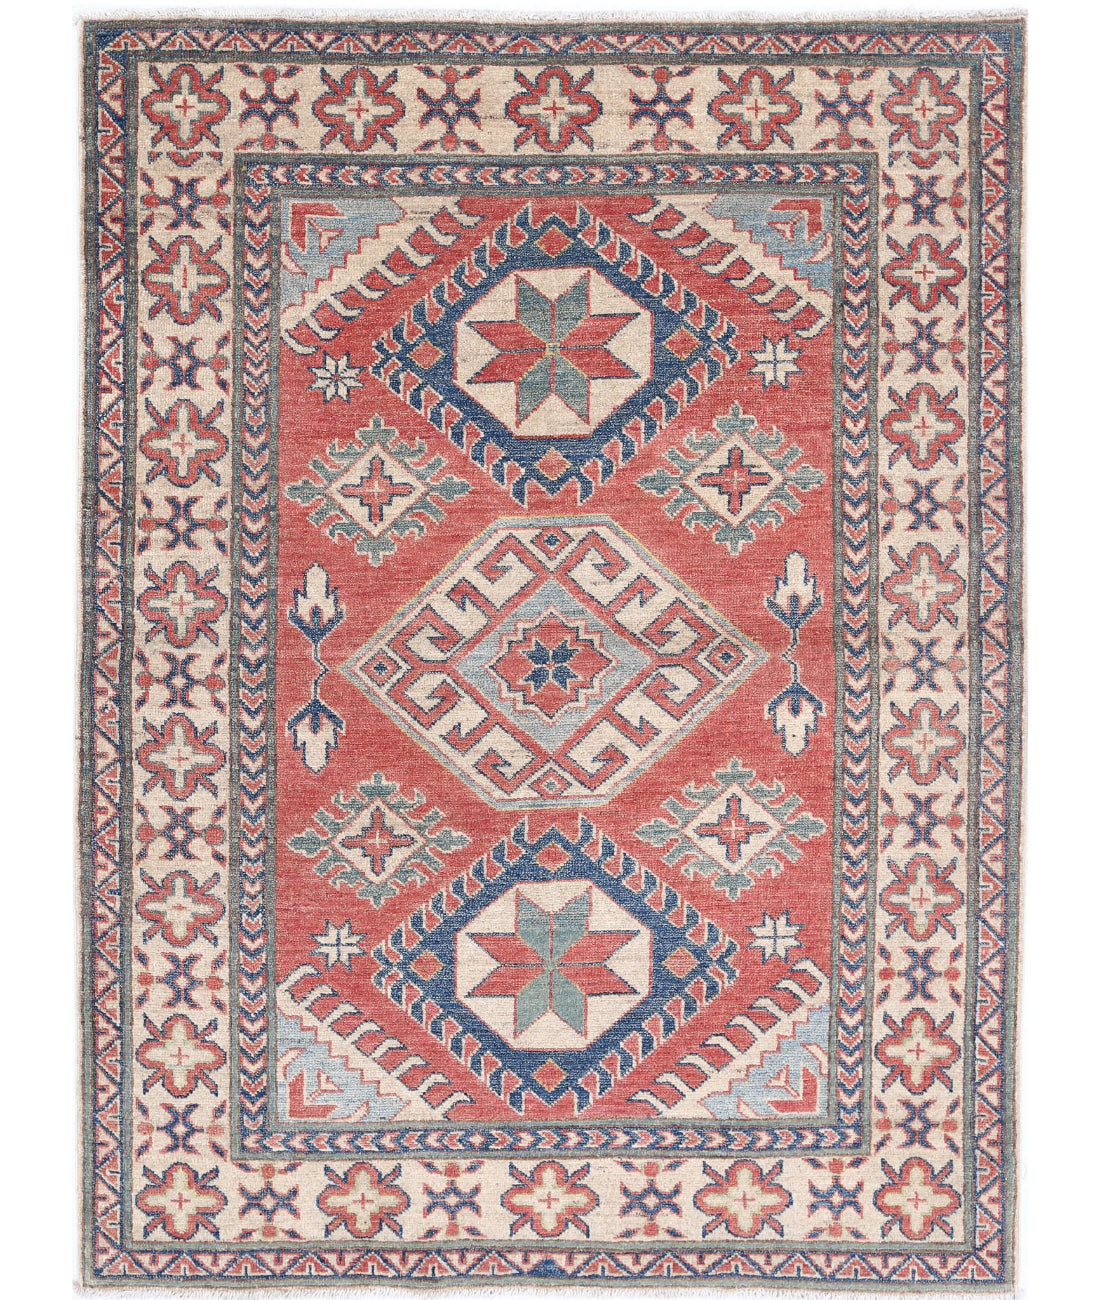 Hand Knotted Tribal Kazak Wool Rug - 4'0'' x 5'4'' 4'0'' x 5'4'' (120 X 160) / Red / Ivory